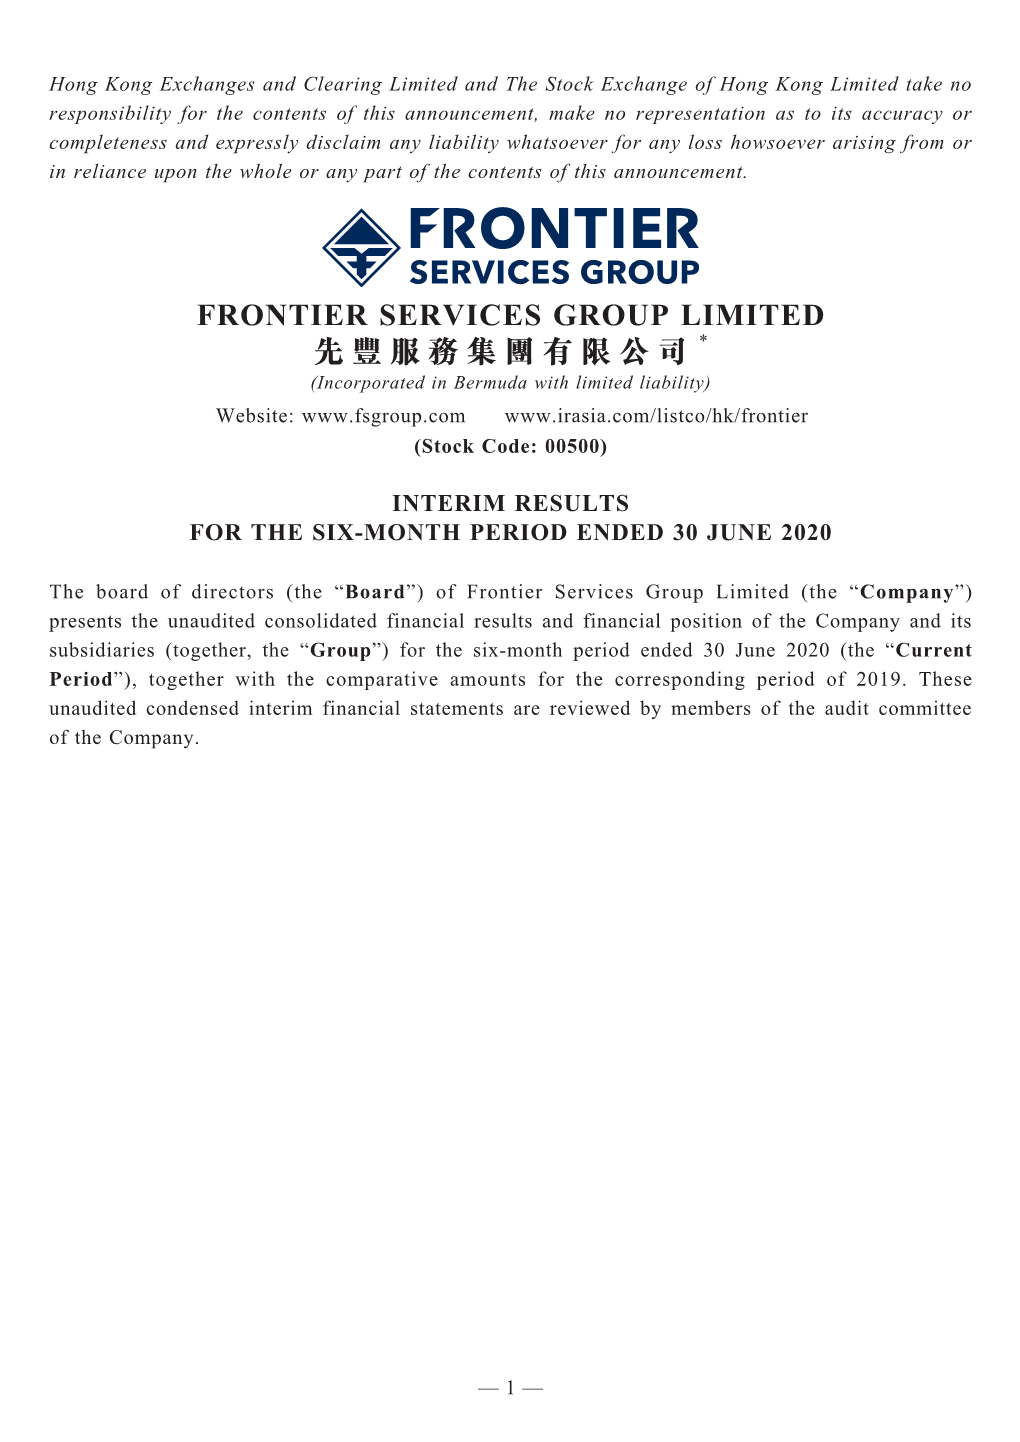 Frontier Services Group Limited 先豐服務集團有限